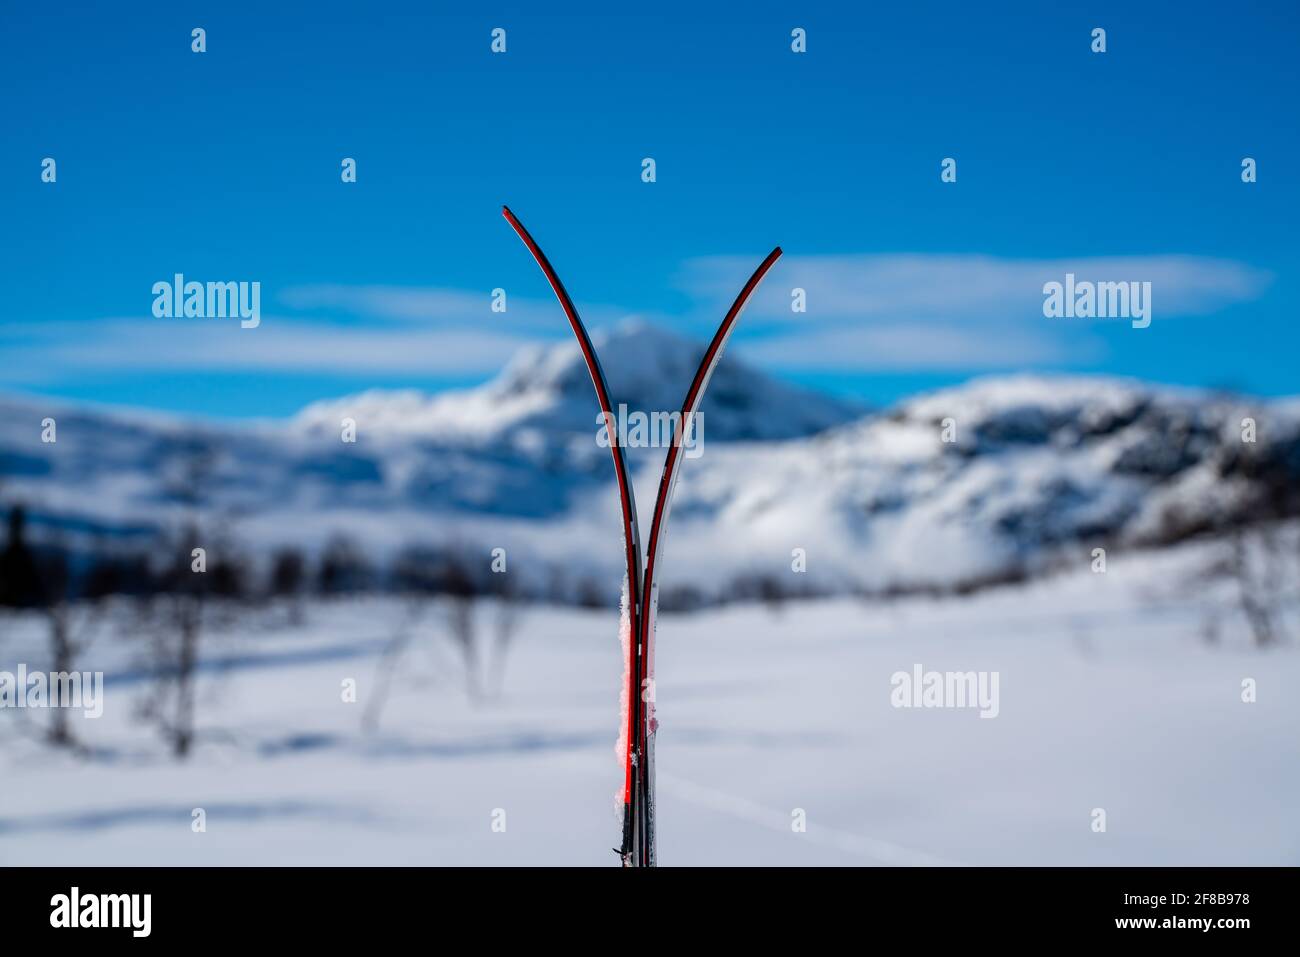 Skis stacked together in the snow with blurred snow capped mountains. Stock Photo